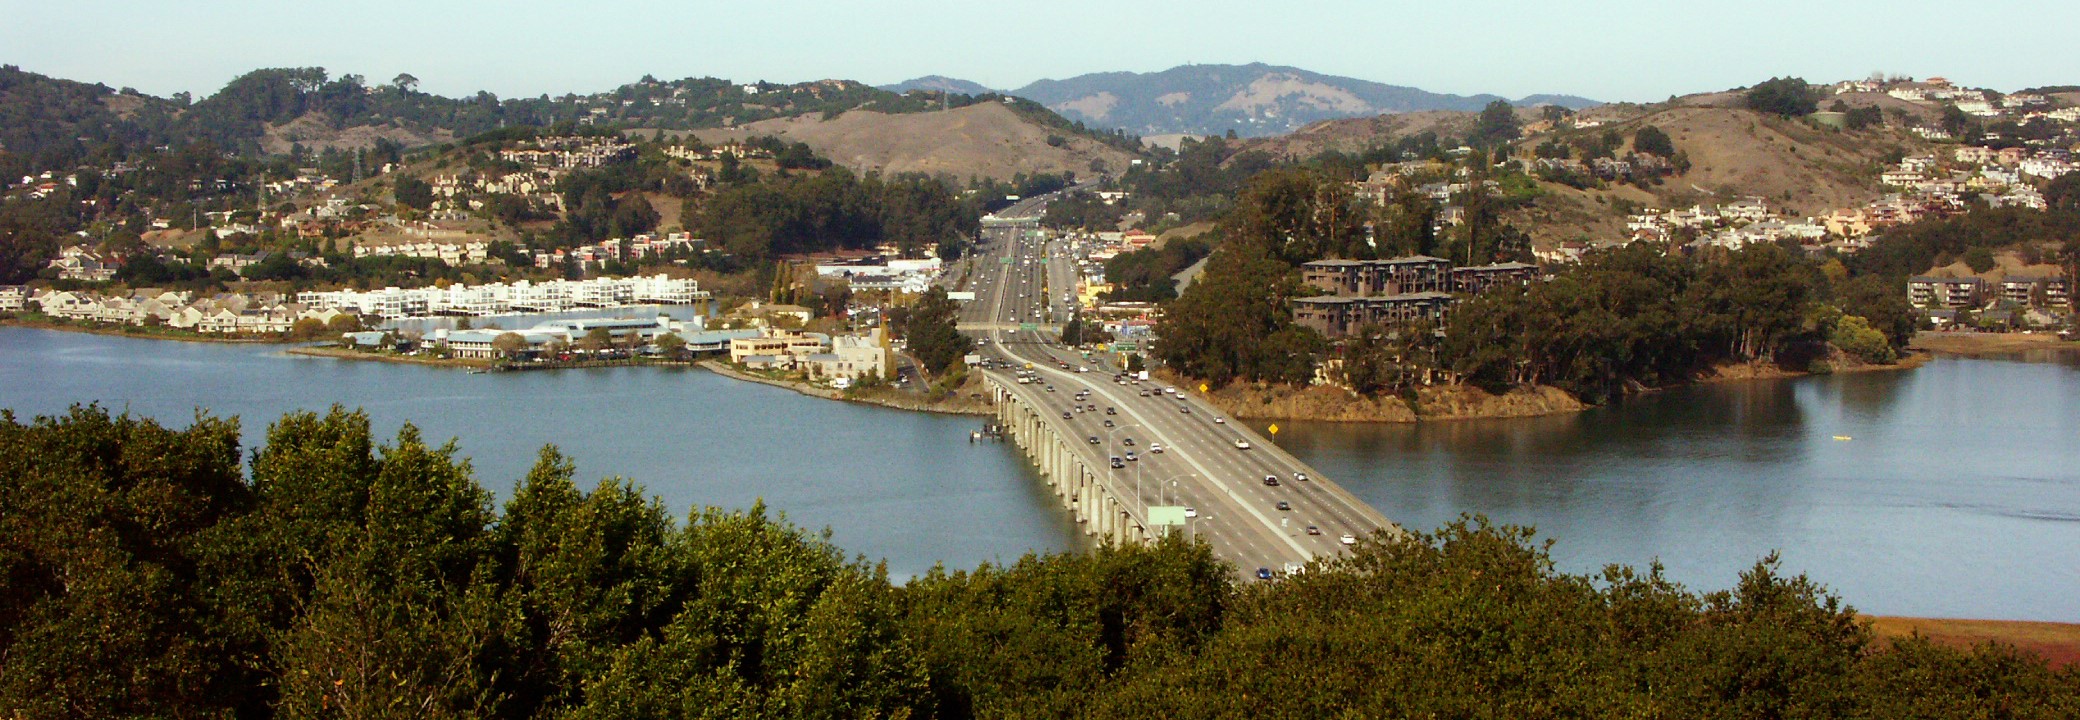 Take a Survey on the Future of Transportation in Marin